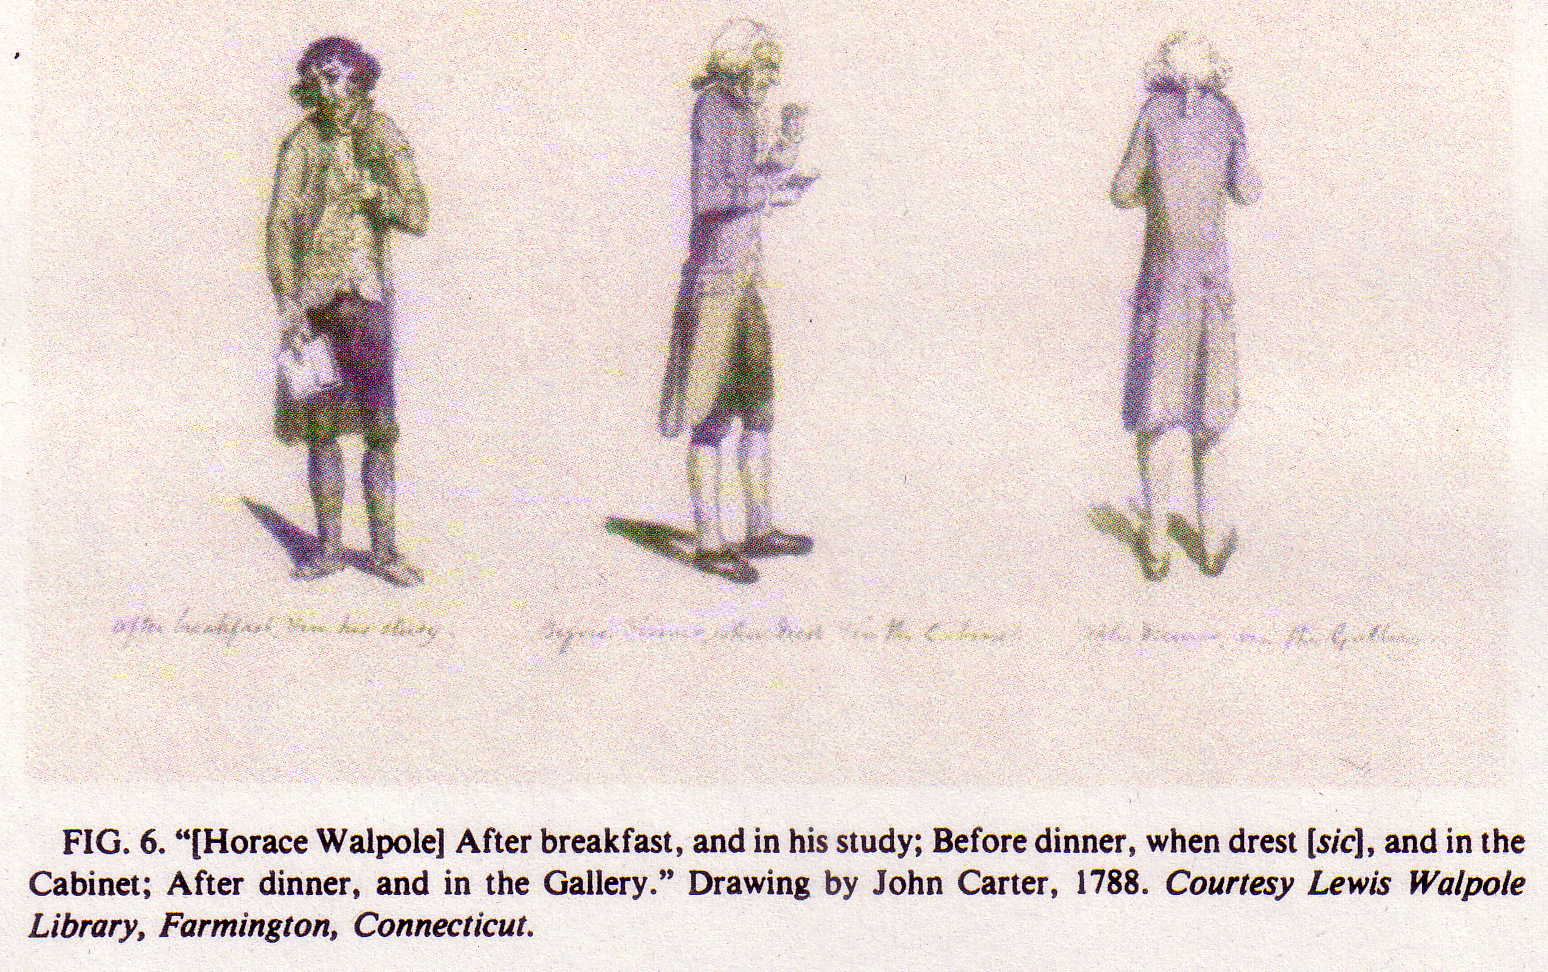 Horace Walpole sketched by John Carter in 1788